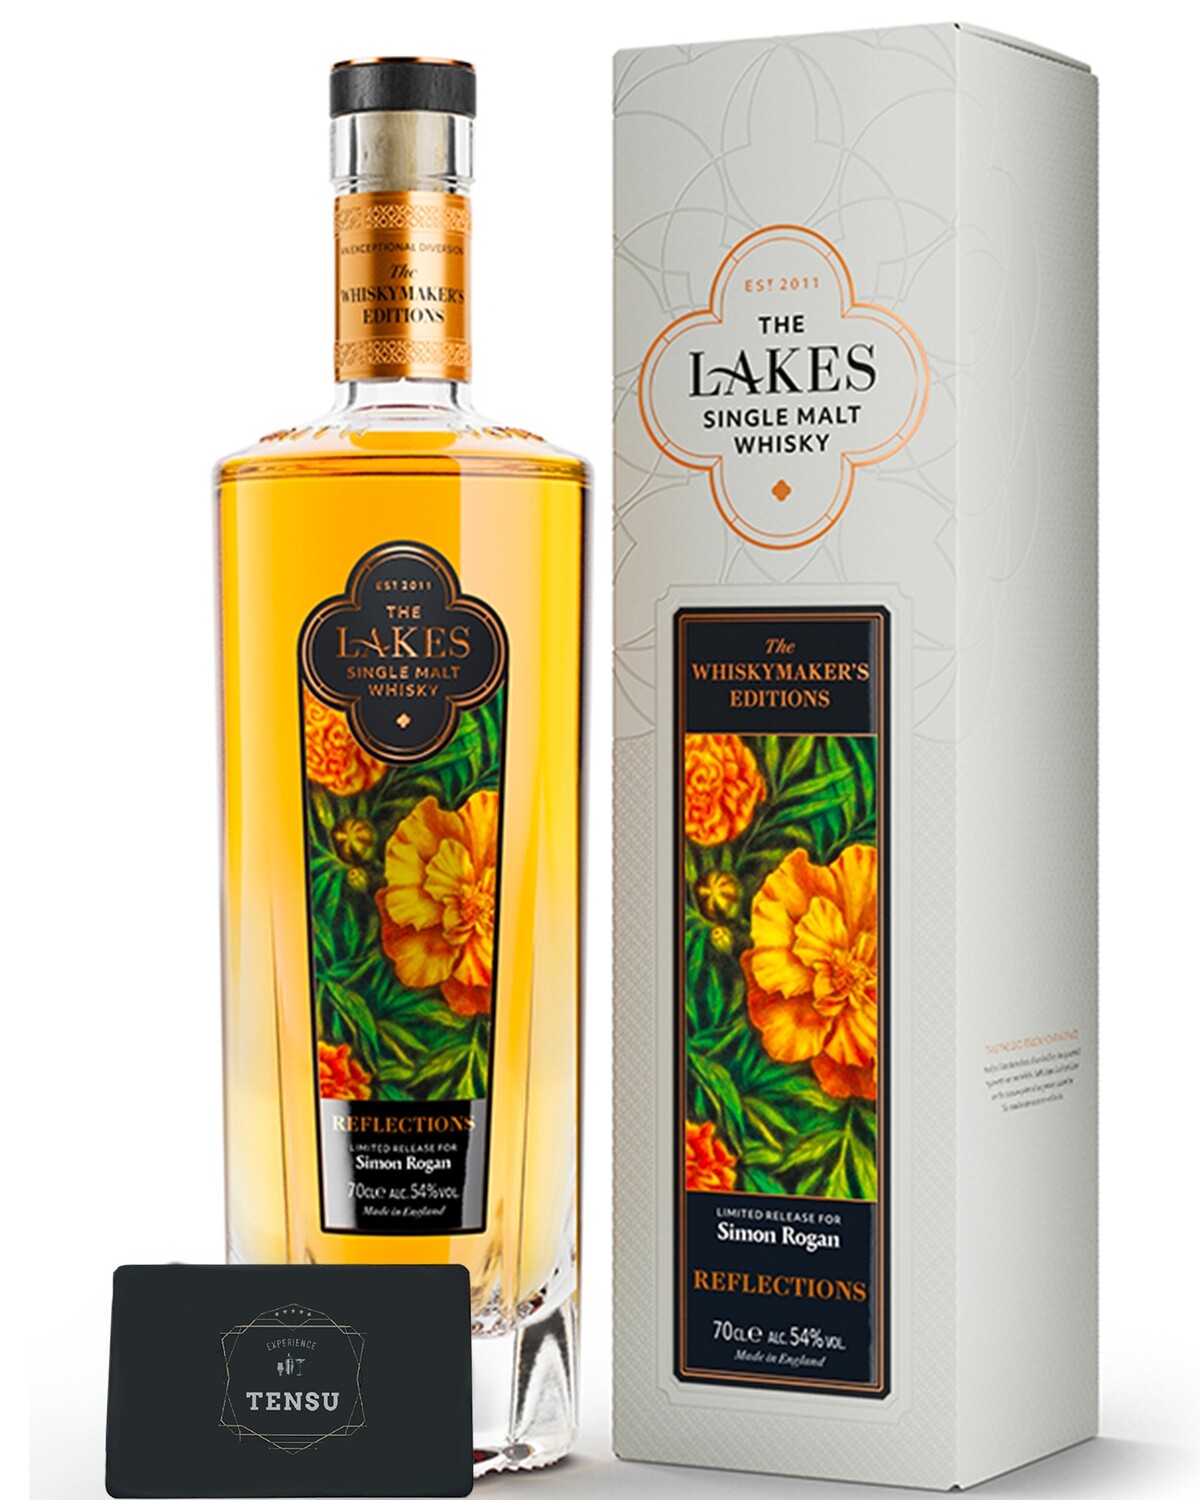 The Lakes - The Whiskymaker's Editions - Reflections 54.0 "The Lakes Distillery"